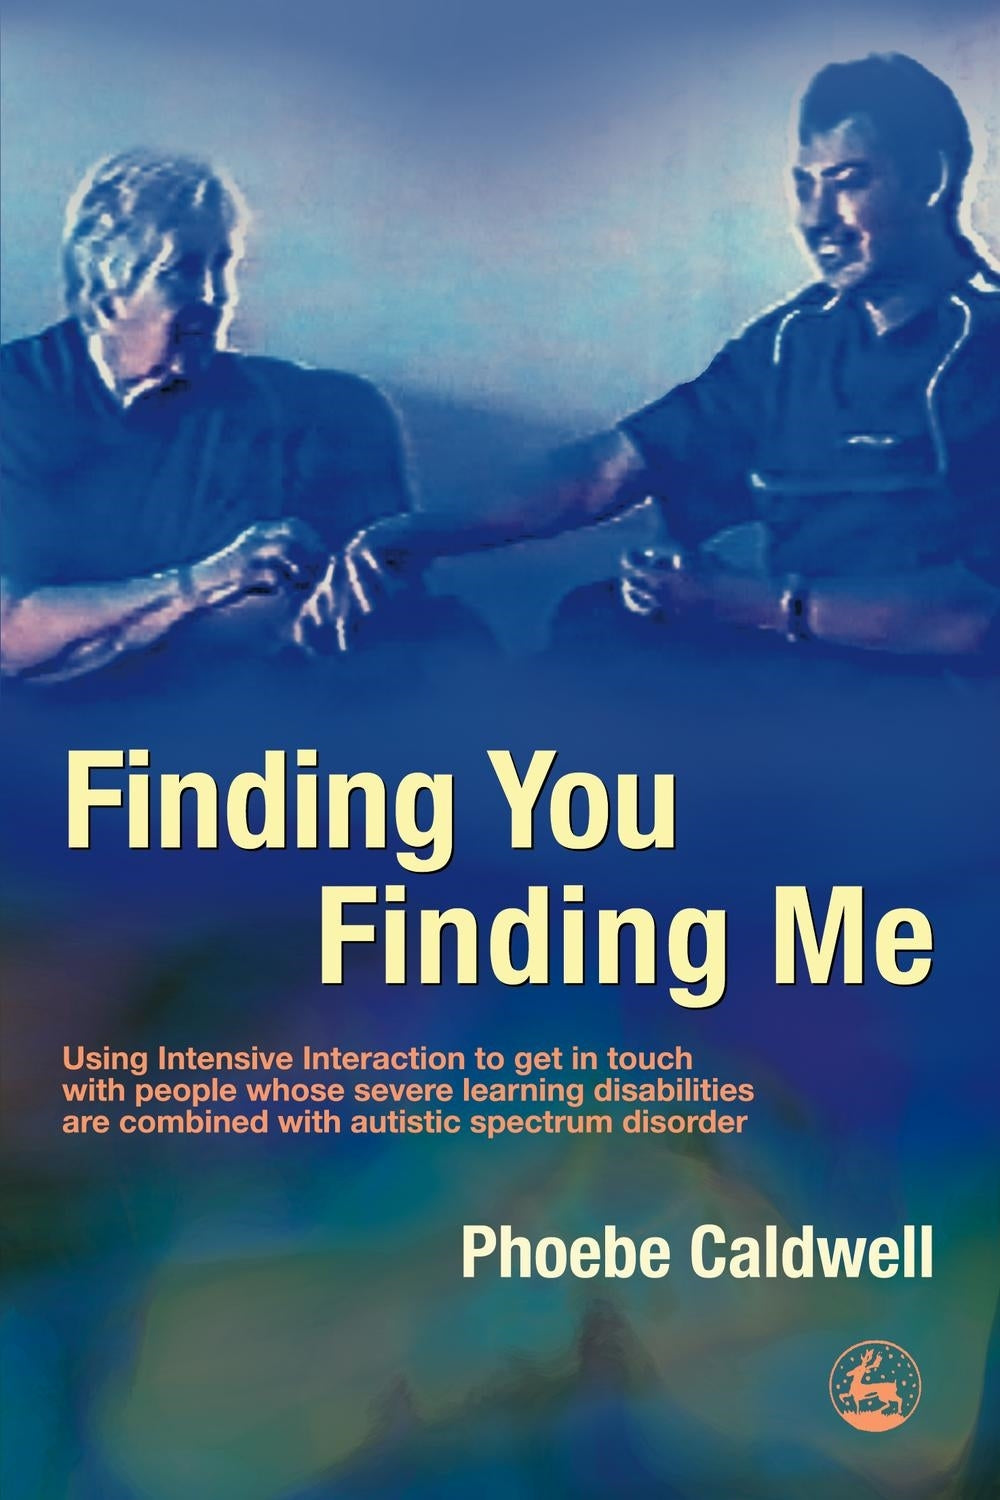 Finding You Finding Me by Phoebe Caldwell